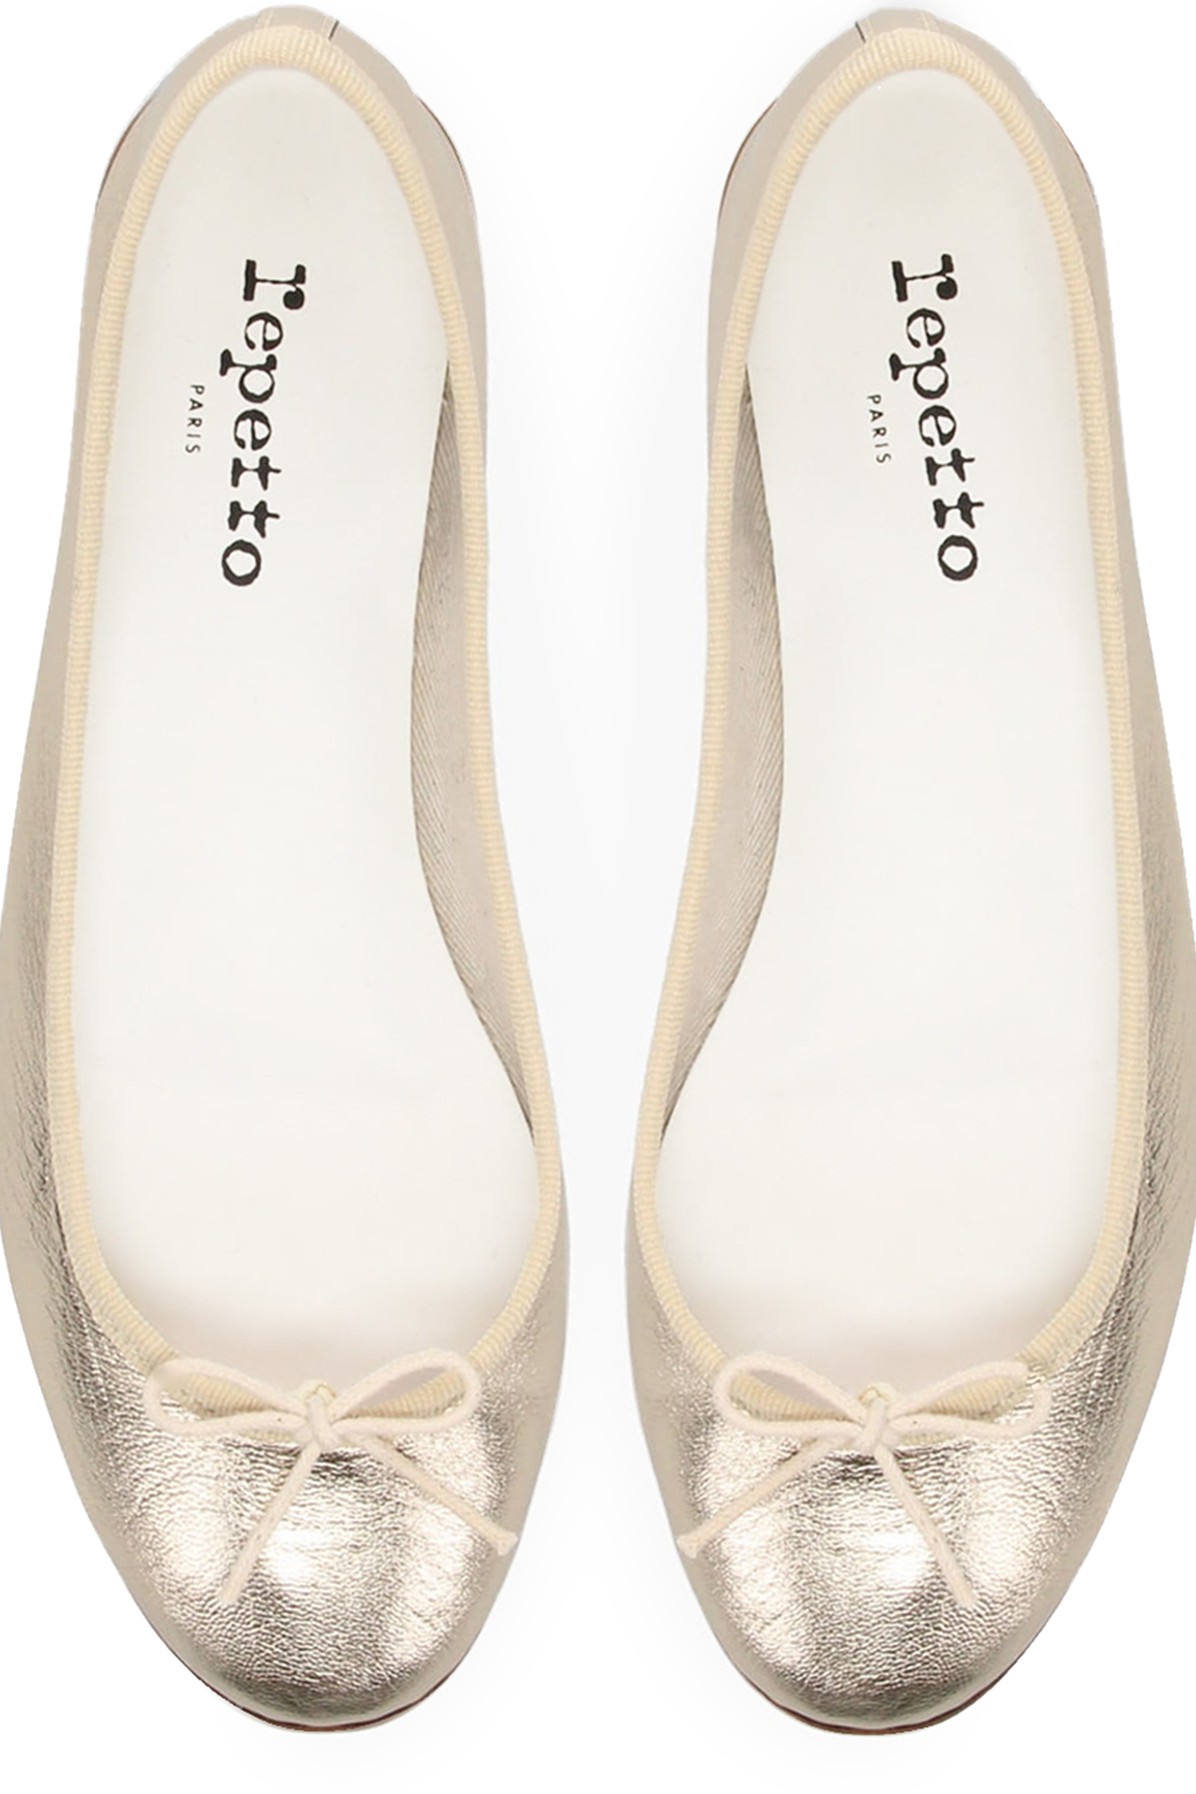 repetto Camille ballet flats